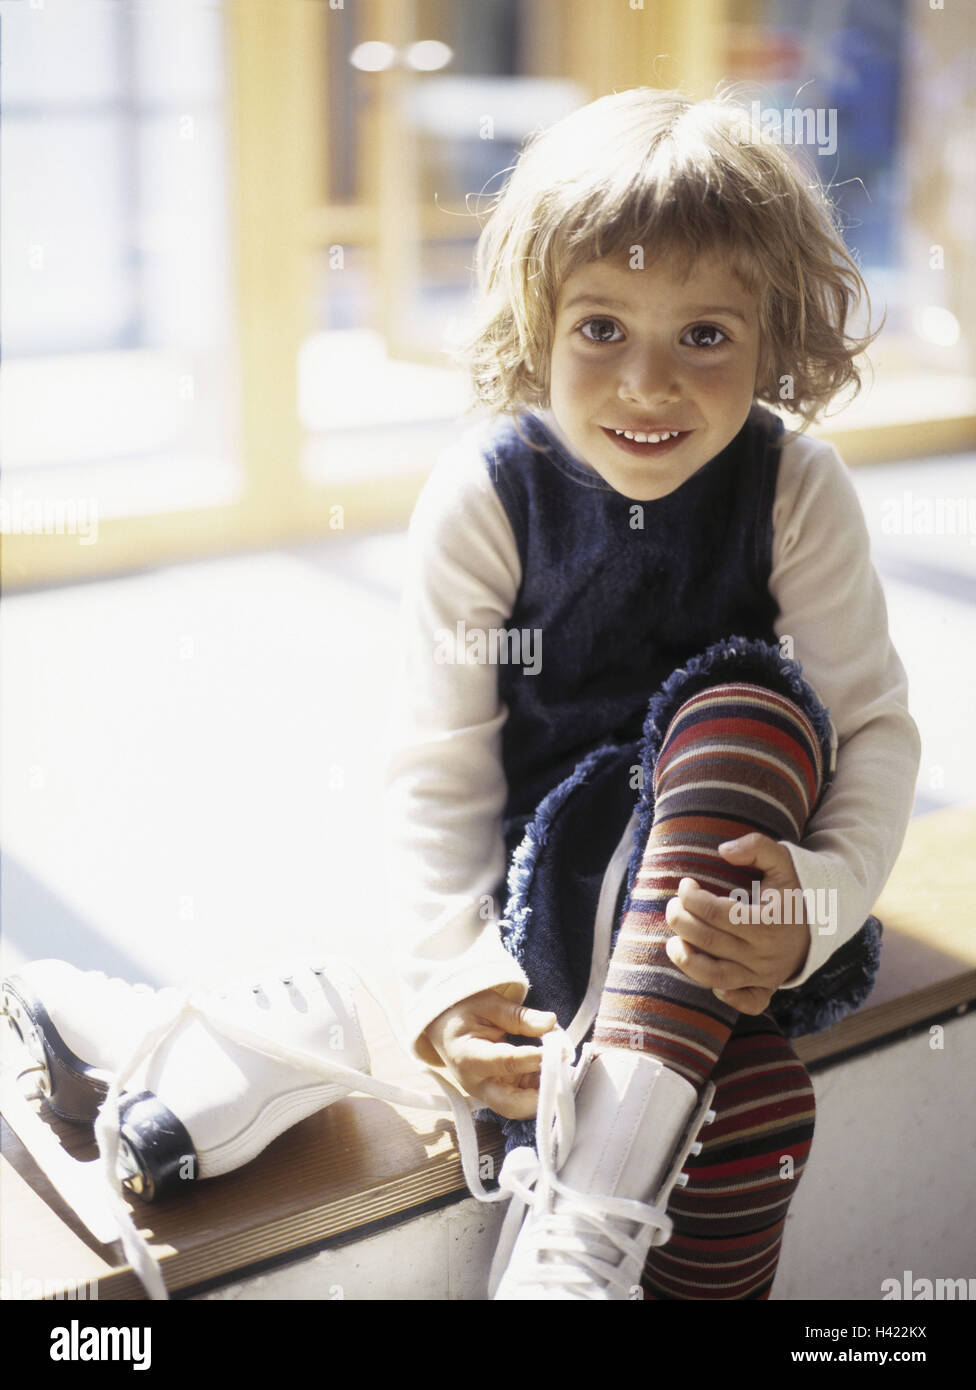 Girls, sit, draw ice skates, child, 5 - 7 years, dress, sock trousers, curled, leisure time, childhood, go skating, ice stadium, shoes, inside, independently, view camera, happy, smile Stock Photo